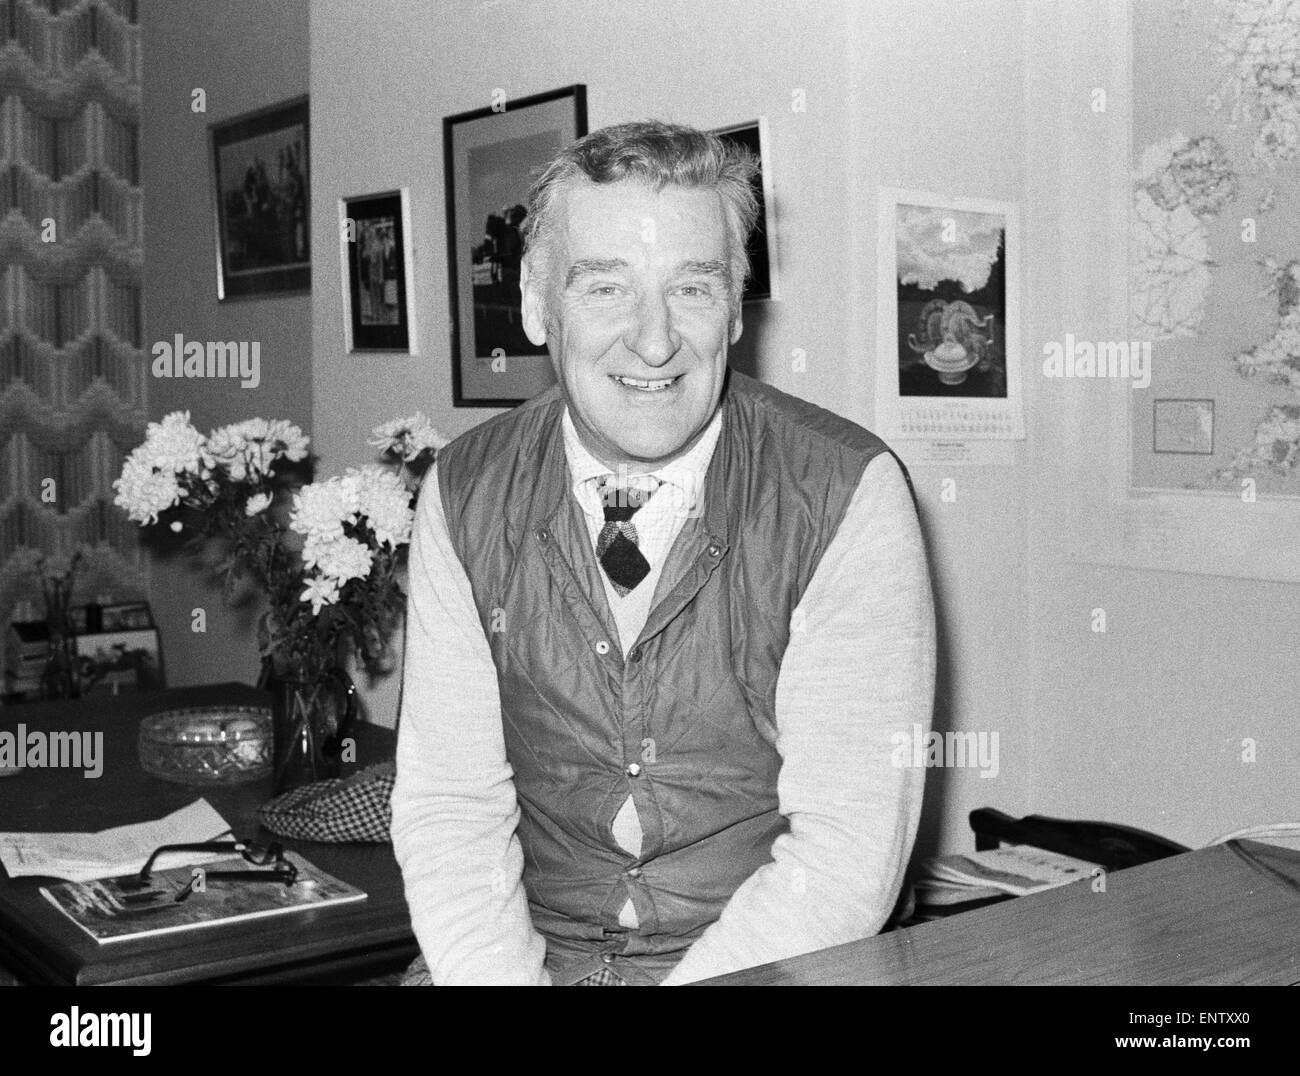 Donald 'Ginger' McCain, the trainer of famous champion racehorse Red Rum, pictured in his office at his stables in Southport, Merseyside ahead of the 1980 Grand national race. 26th March 1980. Stock Photo